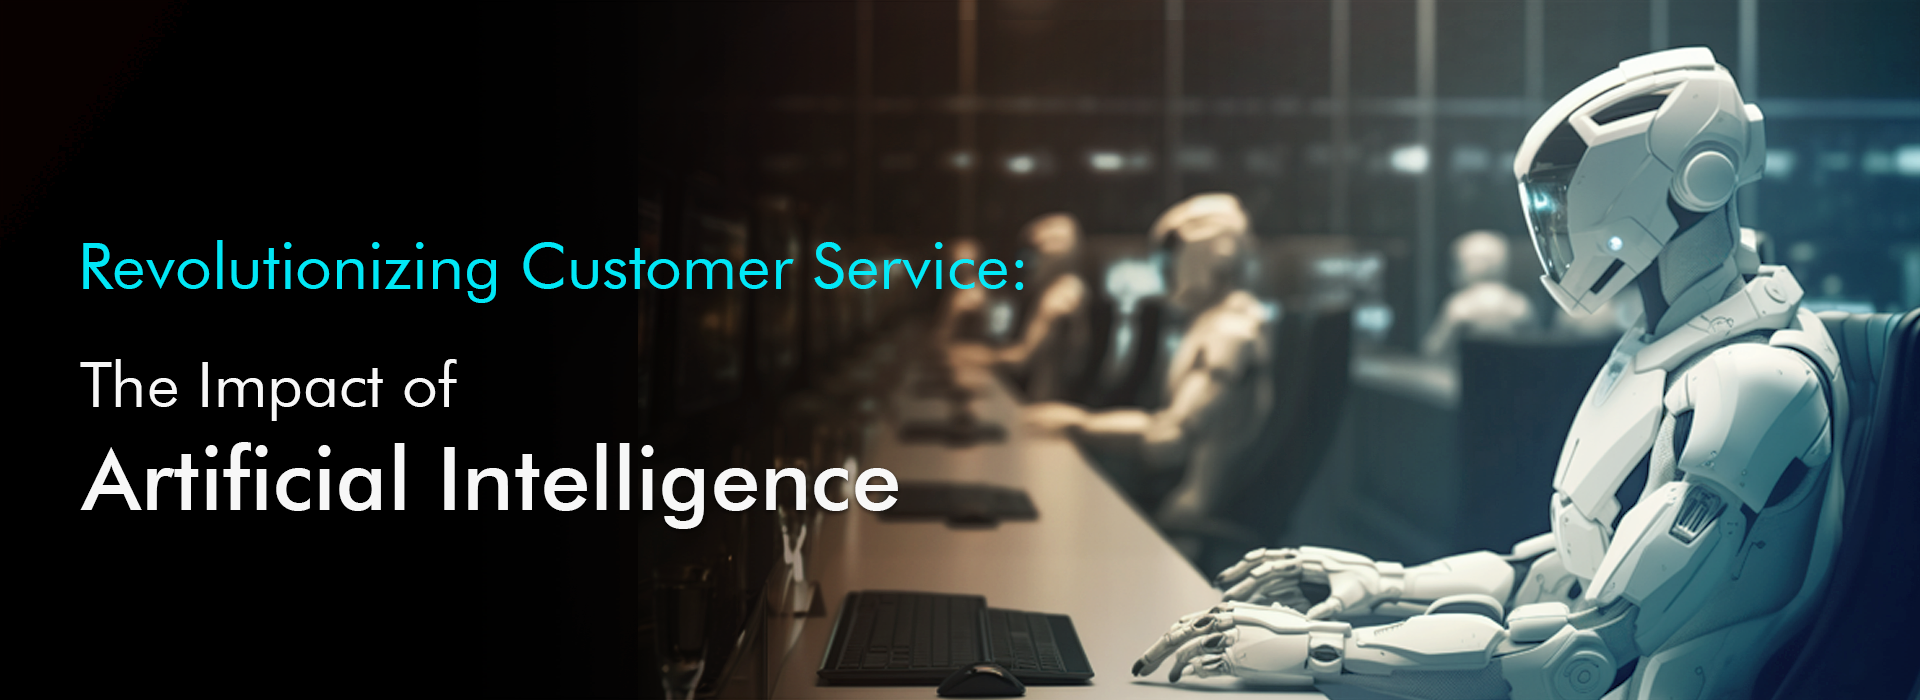 Revolutionizing Customer Service: The Impact of Artificial Intelligence